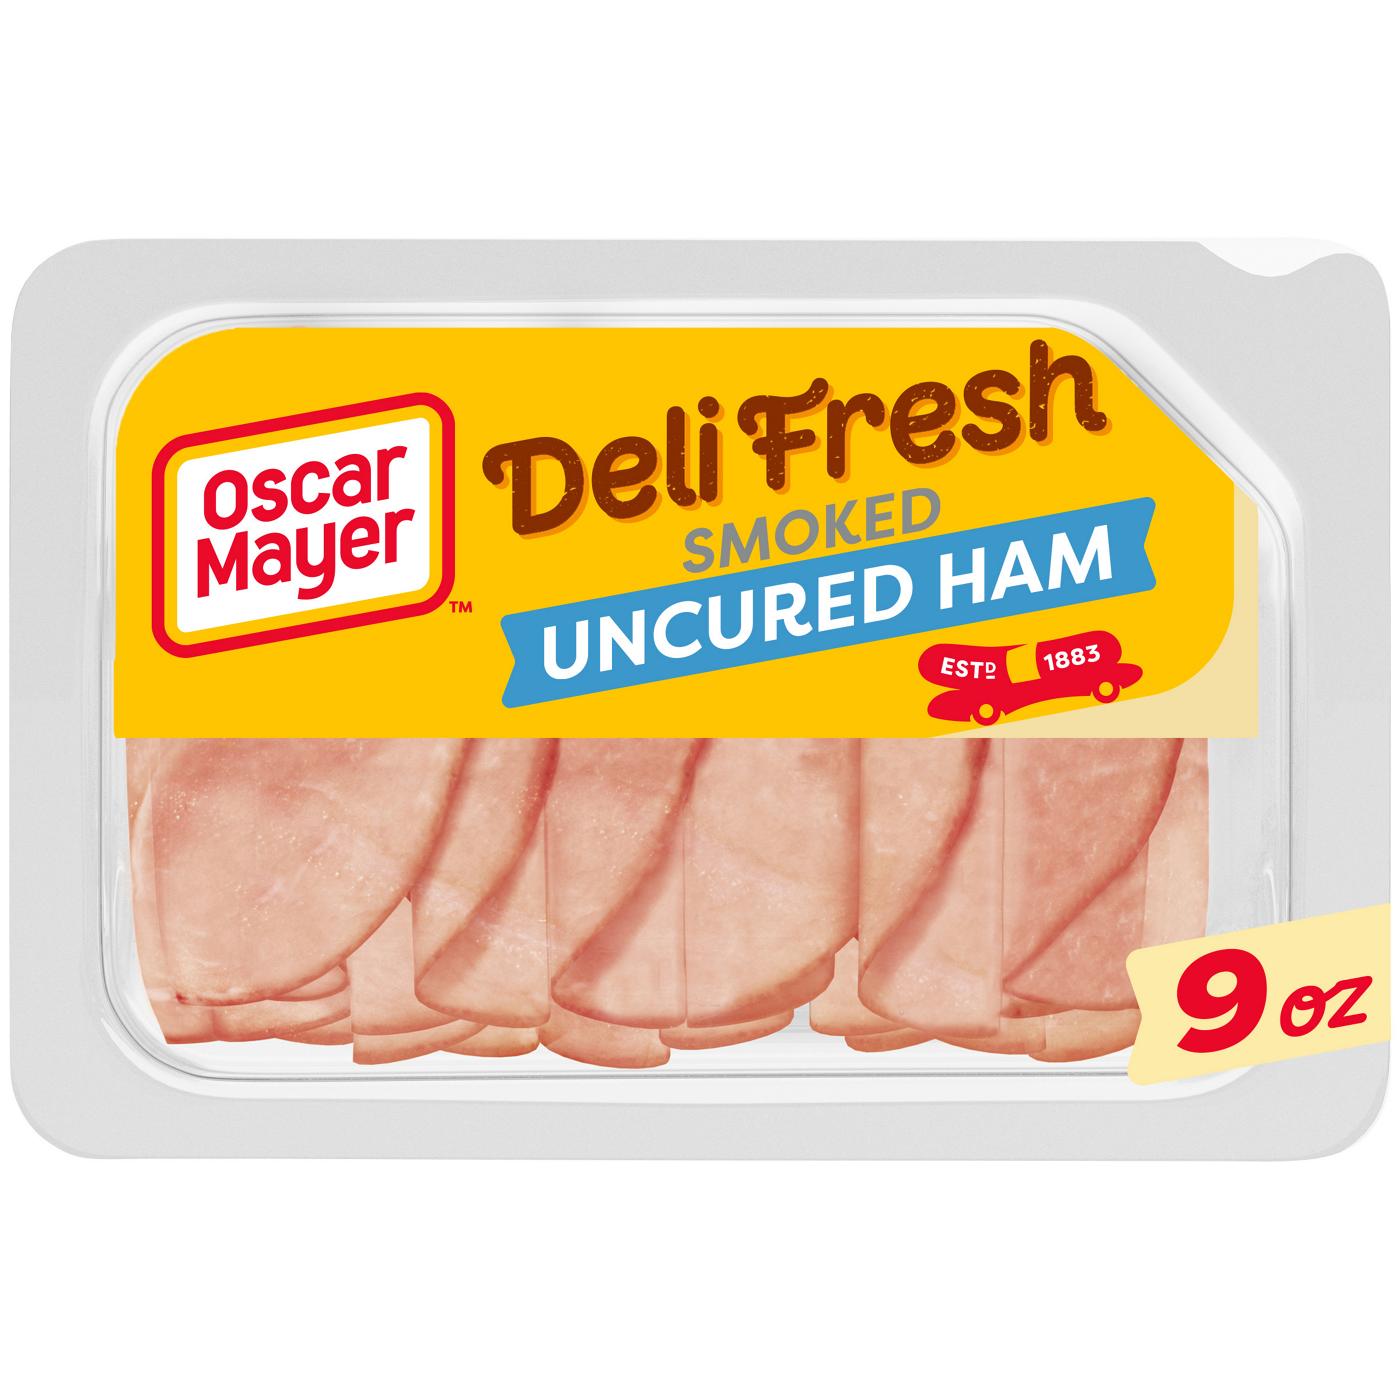 Oscar Mayer Deli Fresh Sliced Smoked Uncured Ham Lunch Meat; image 1 of 4